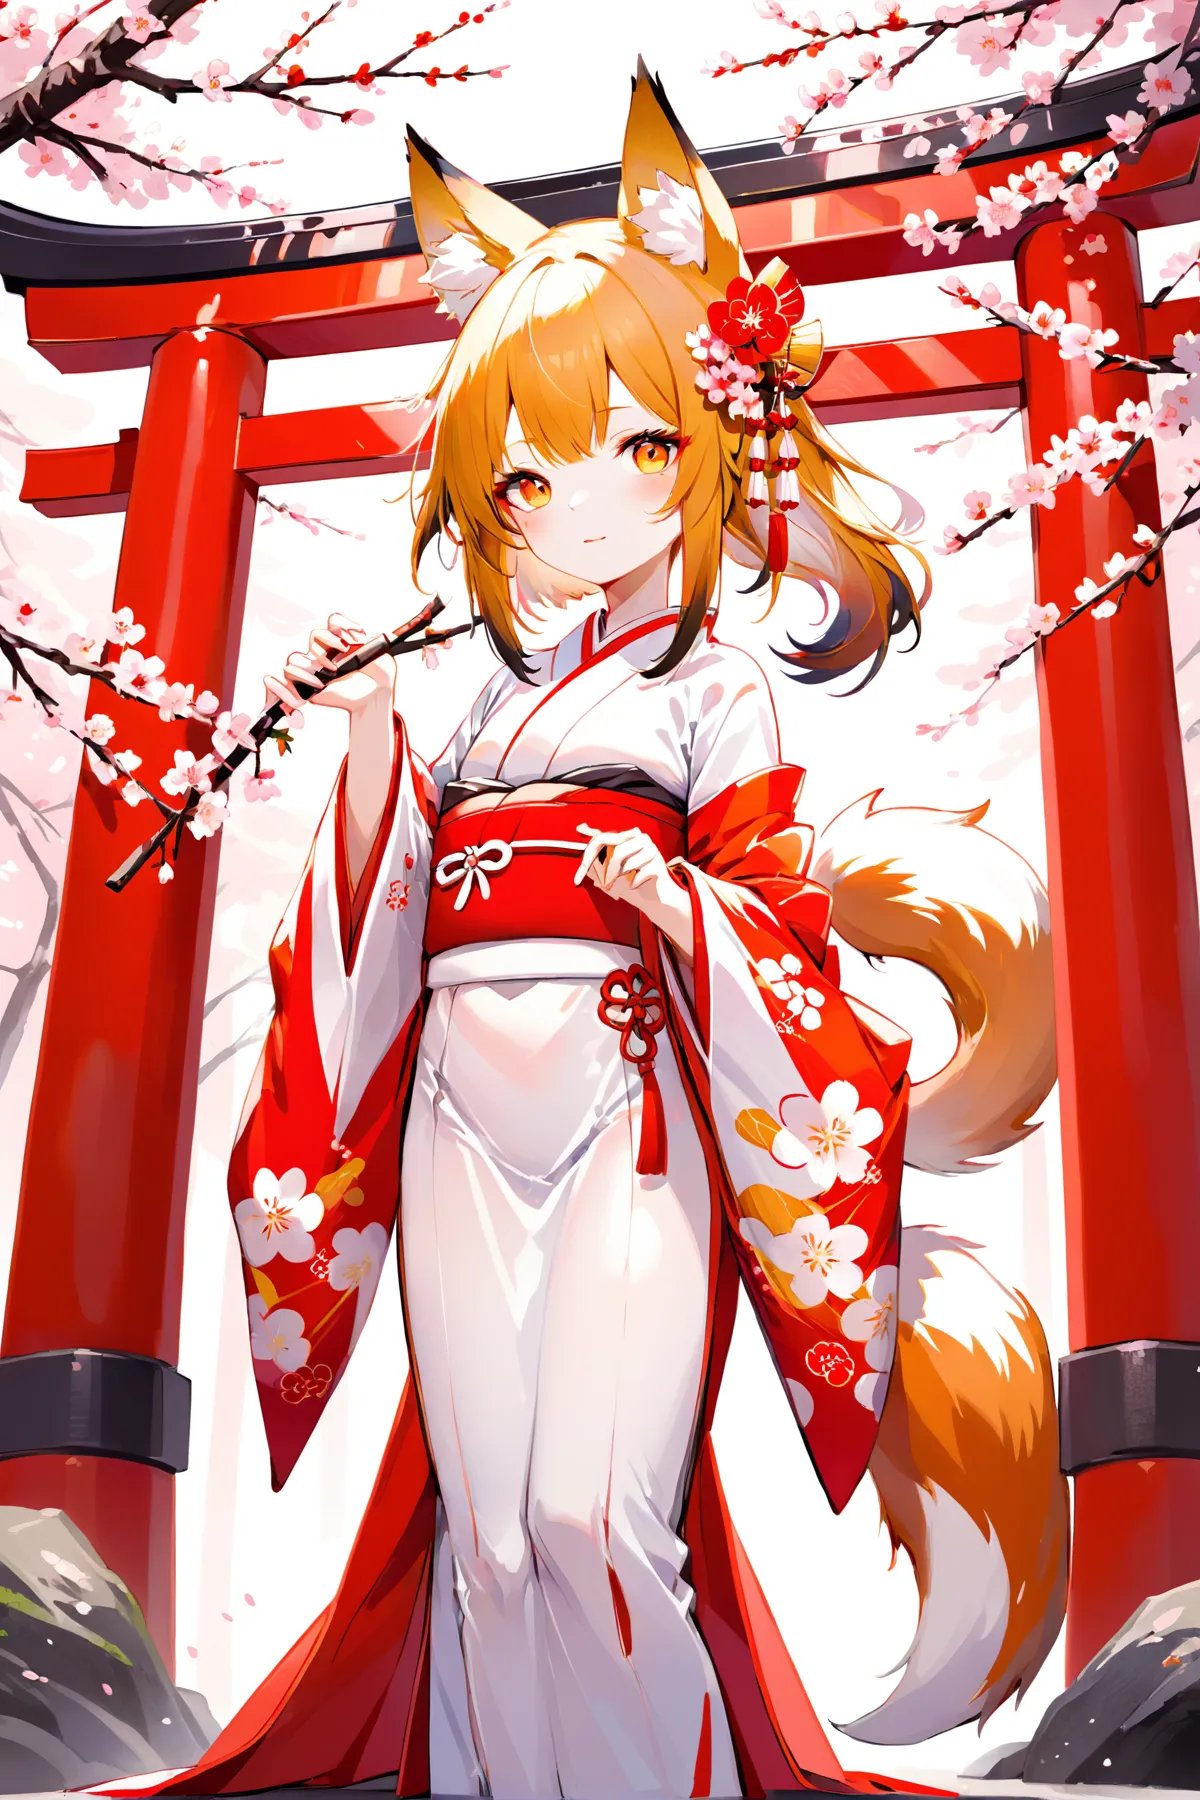 Illustration of a young fox shrine maiden standing in front of a traditional Japanese torii gate, wearing a flowing white and red kimono with fox ears and a tail, holding a sakura branch with blossoms. She gazes at the viewer with mesmerizing golden eyes, carrying an aura of mysticism and grace.、